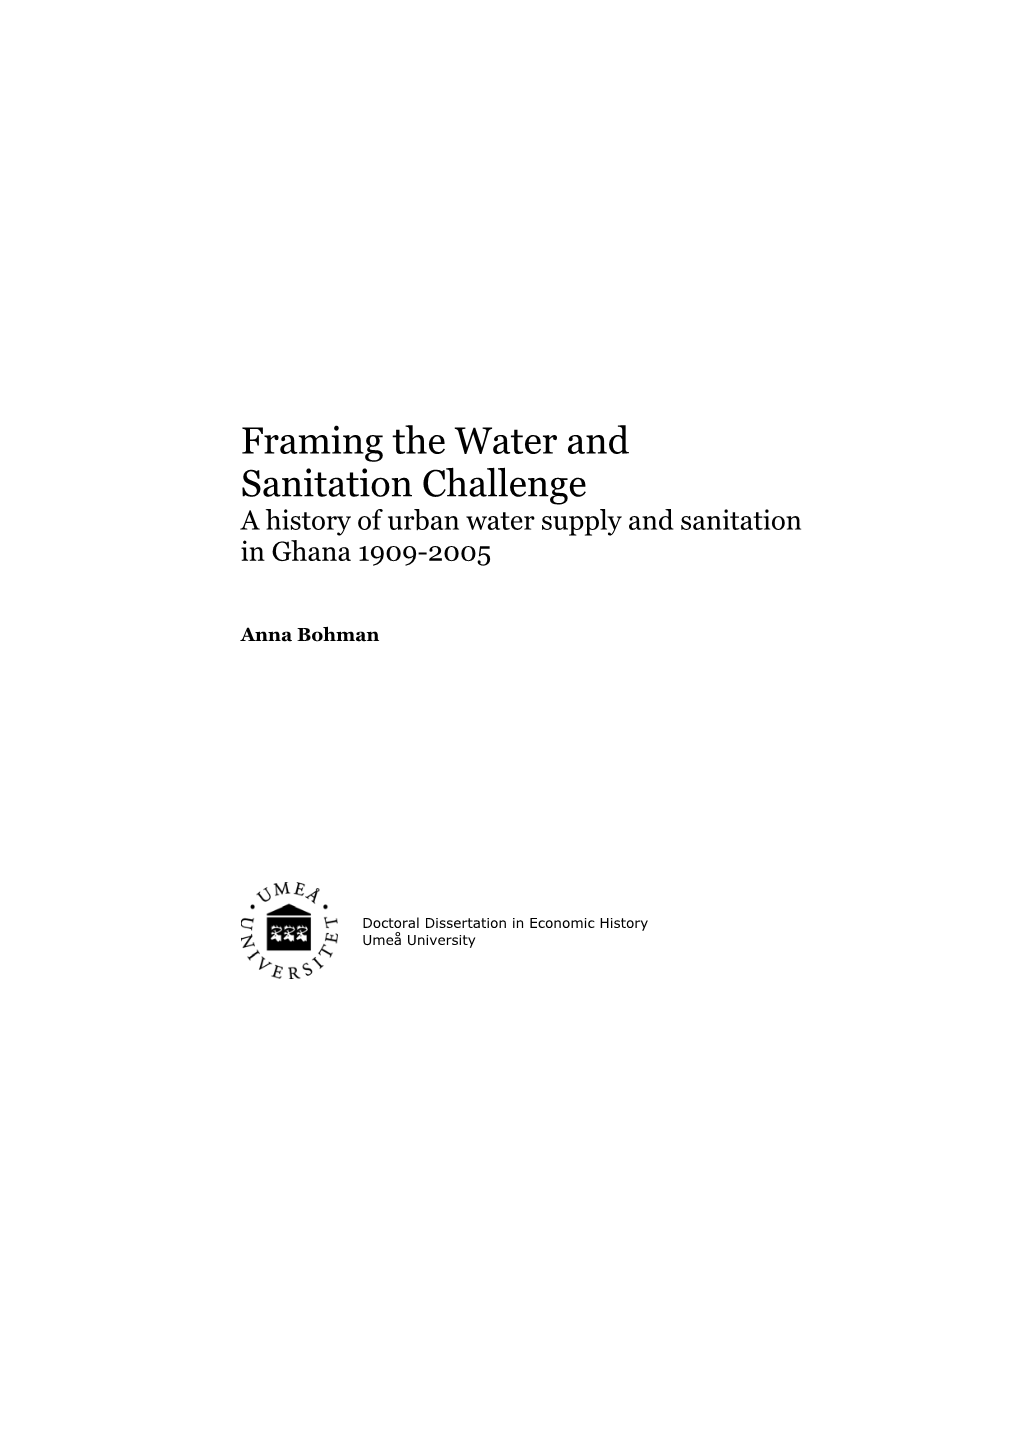 Framing the Water and Sanitation Challenge a History of Urban Water Supply and Sanitation in Ghana 1909-2005